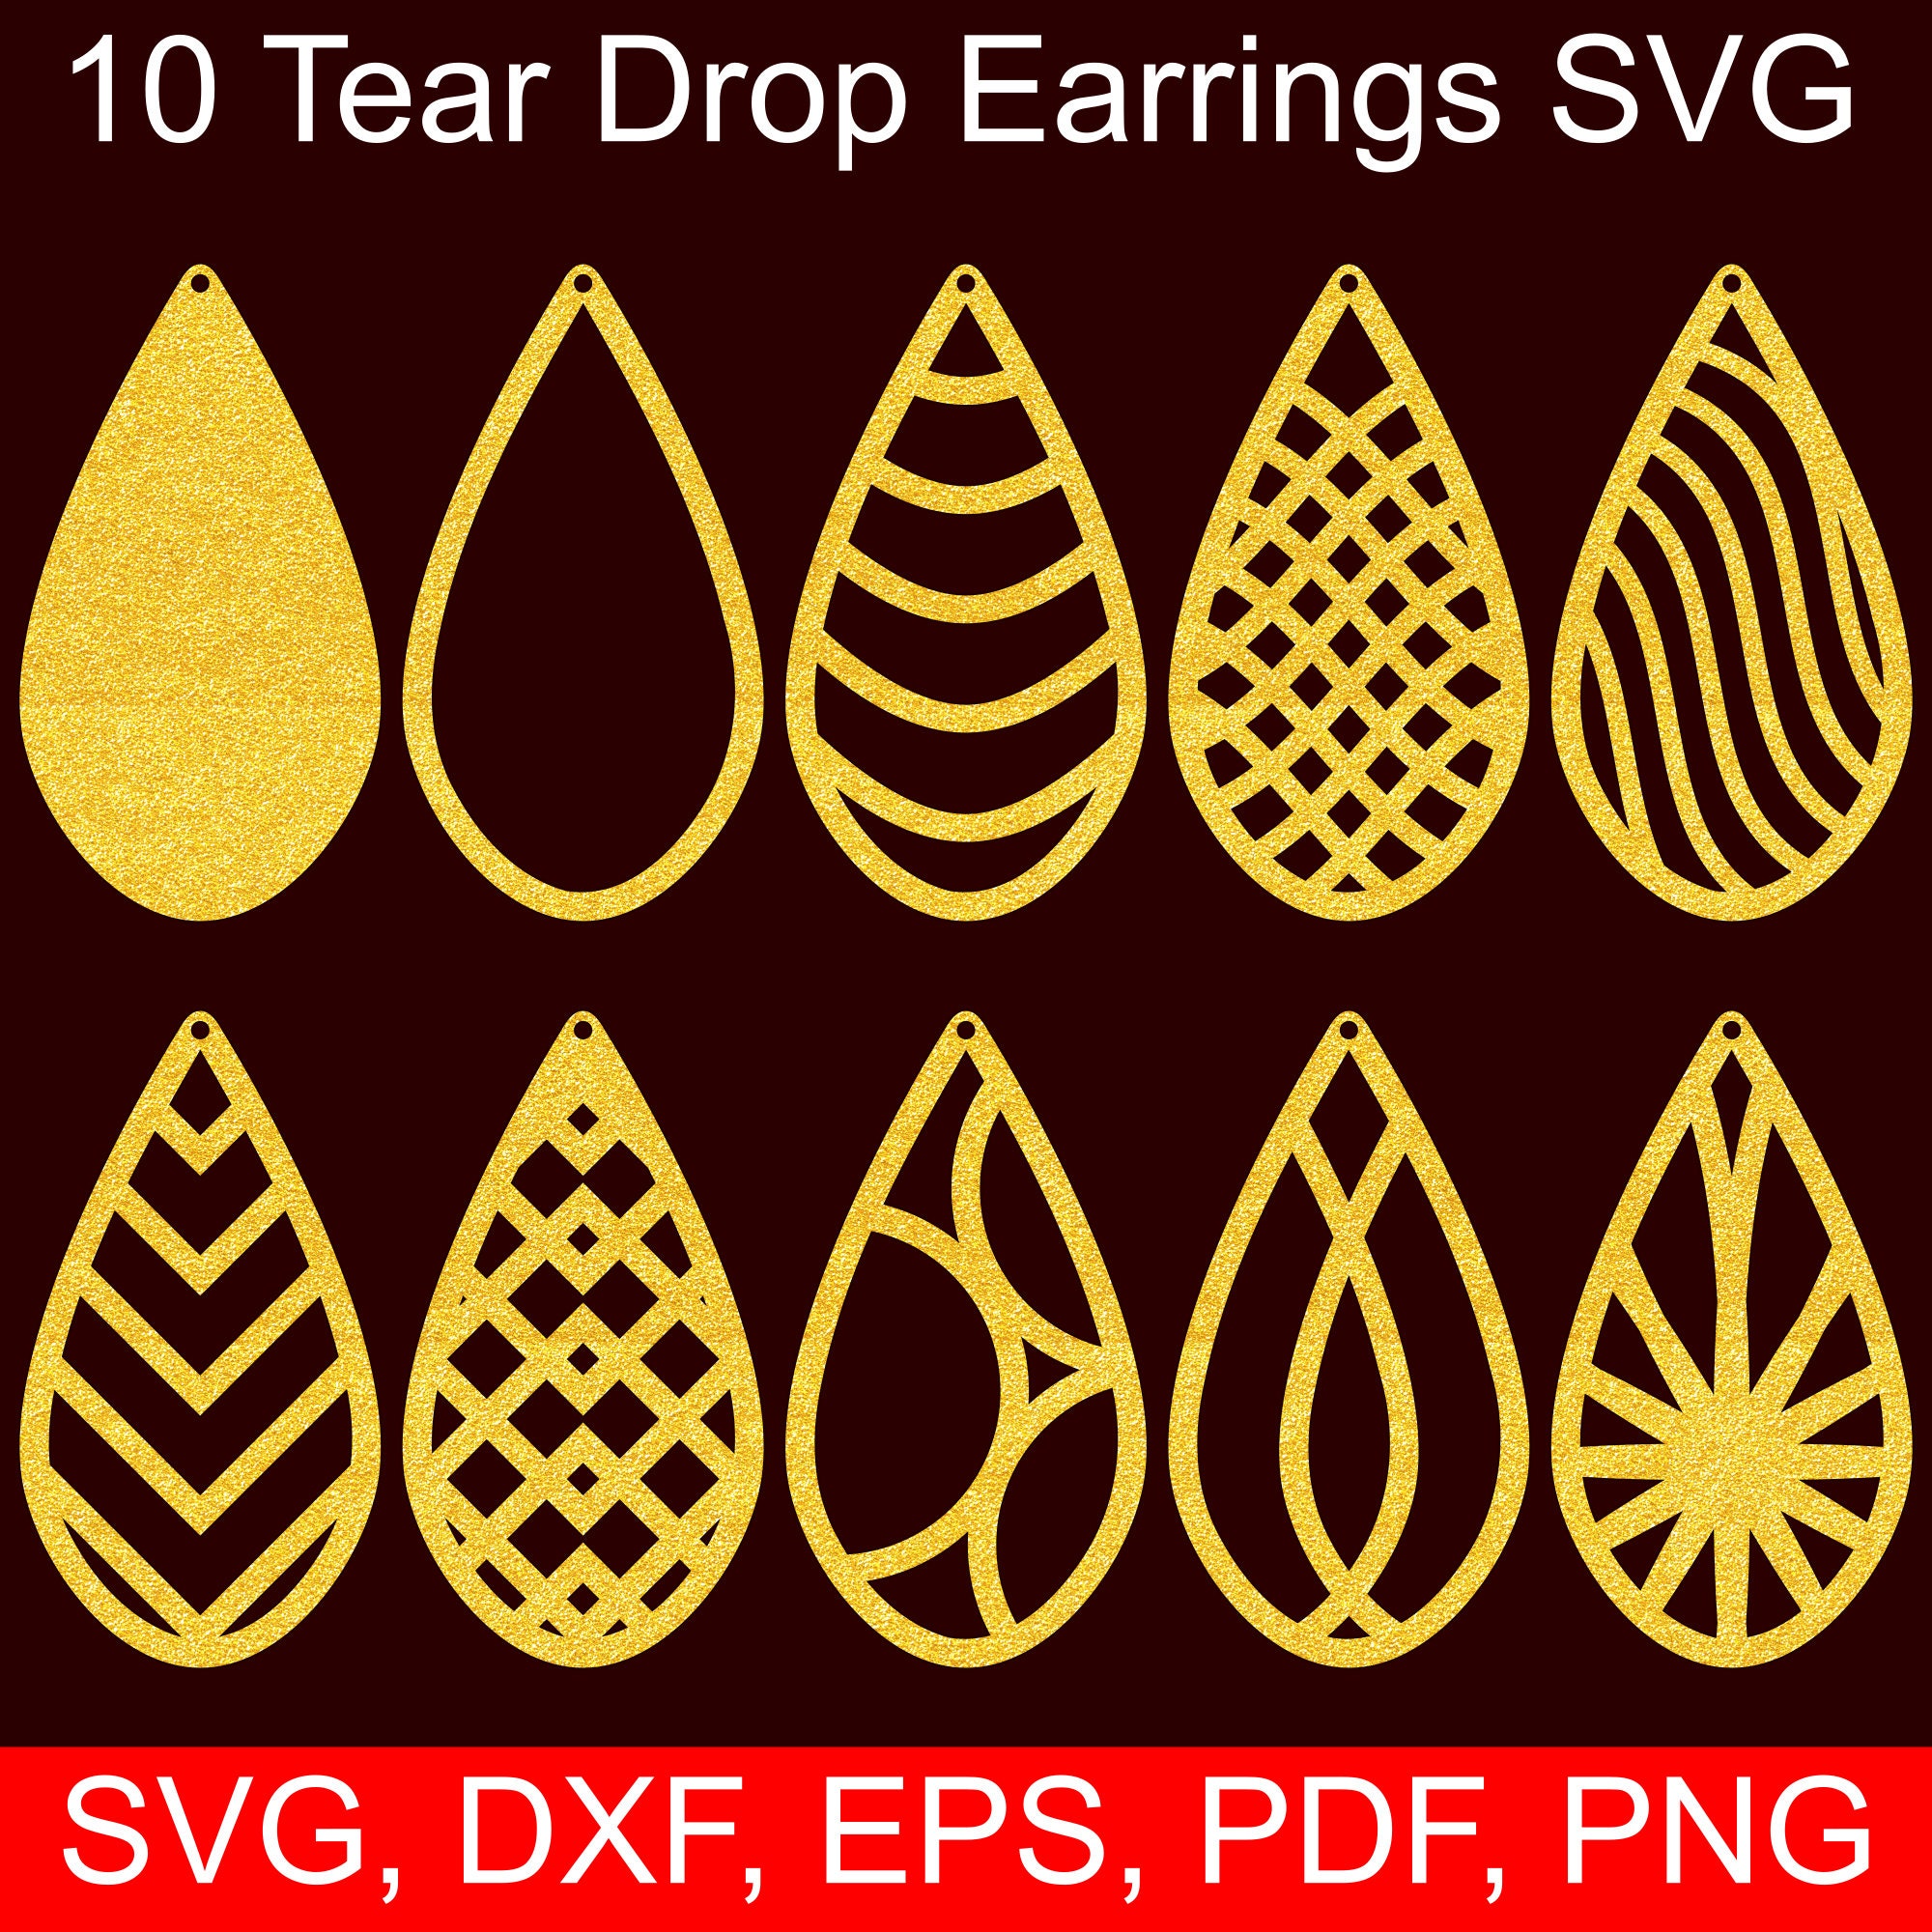 Download 10 Tear Drop Earrings Svg Files Tear Drop Svg Cut Files For Cricut Silhouette Laser Cut Svg Earrings Template With Holes Earring Svgs SVG, PNG, EPS, DXF File